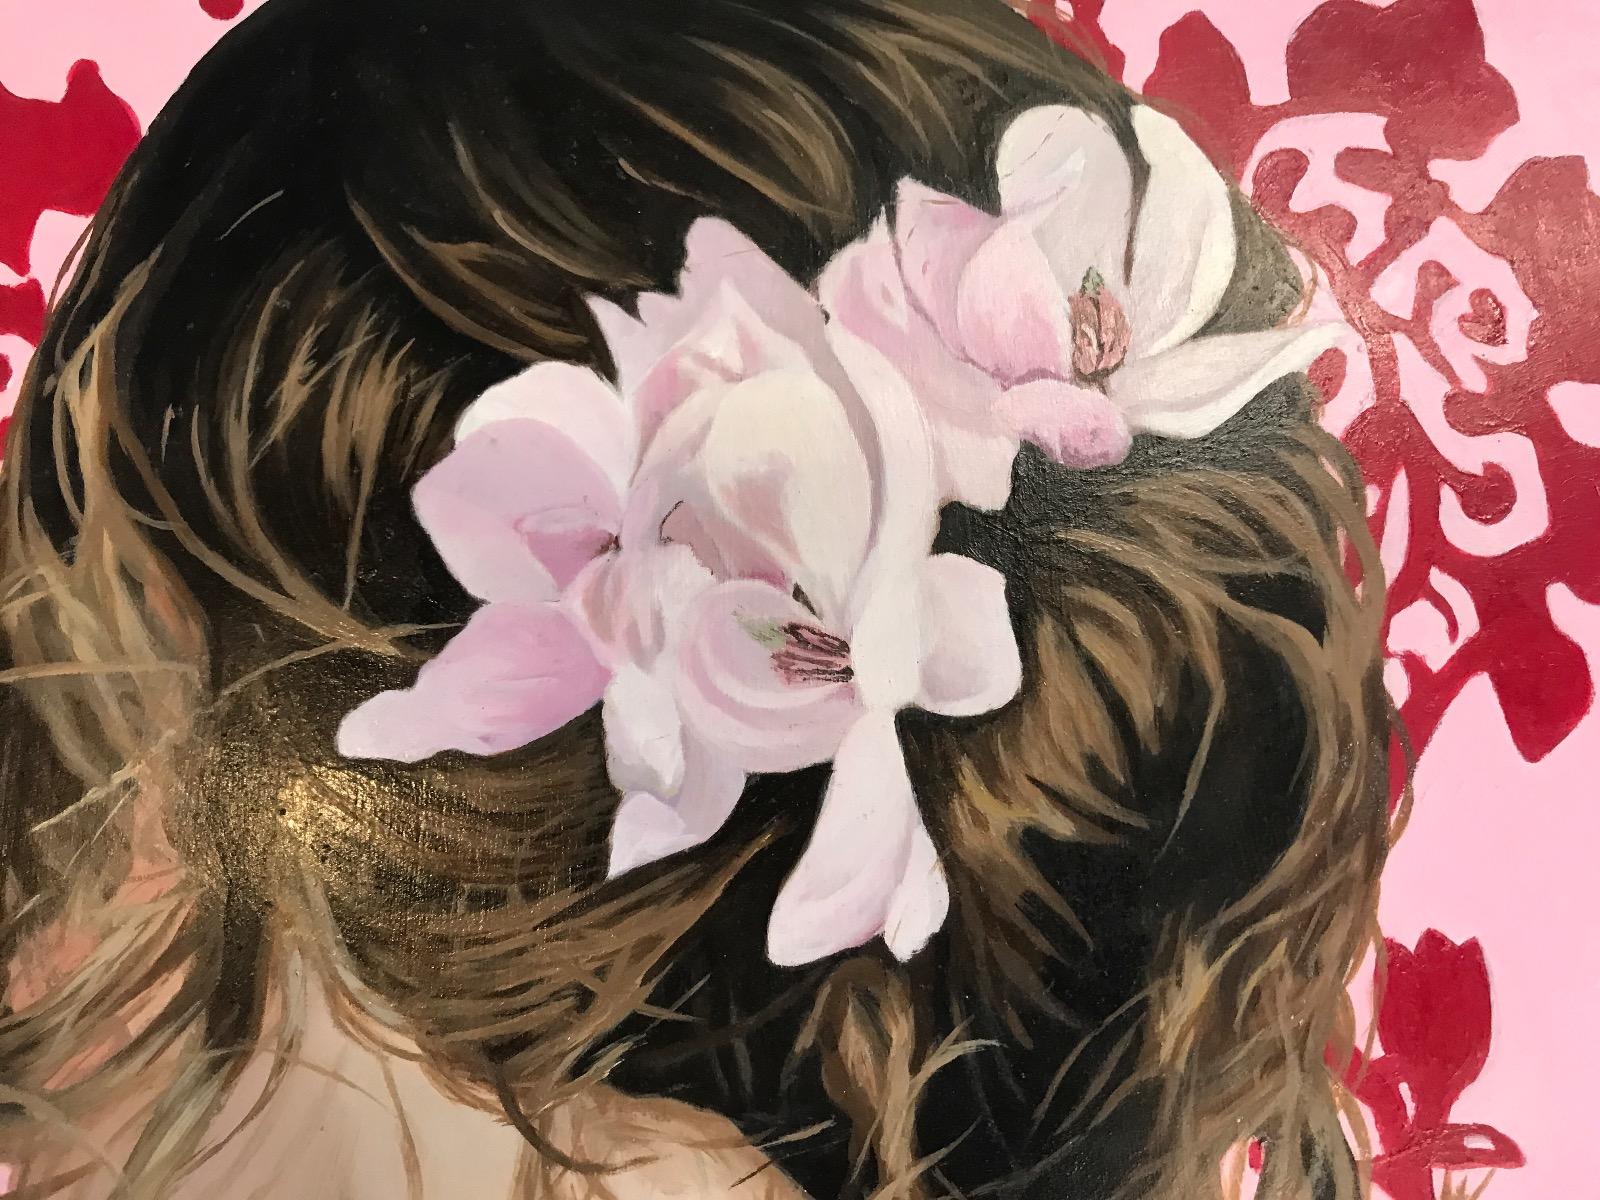 Original painting by Angela Smith showing back of girl's head.

A portrayal of young girl with brown hair tied back by pink flowers.  Surrounded by a vibrant damask pink background.

ADDITIONAL INFORMATION:
Original painting
Oil Paint on